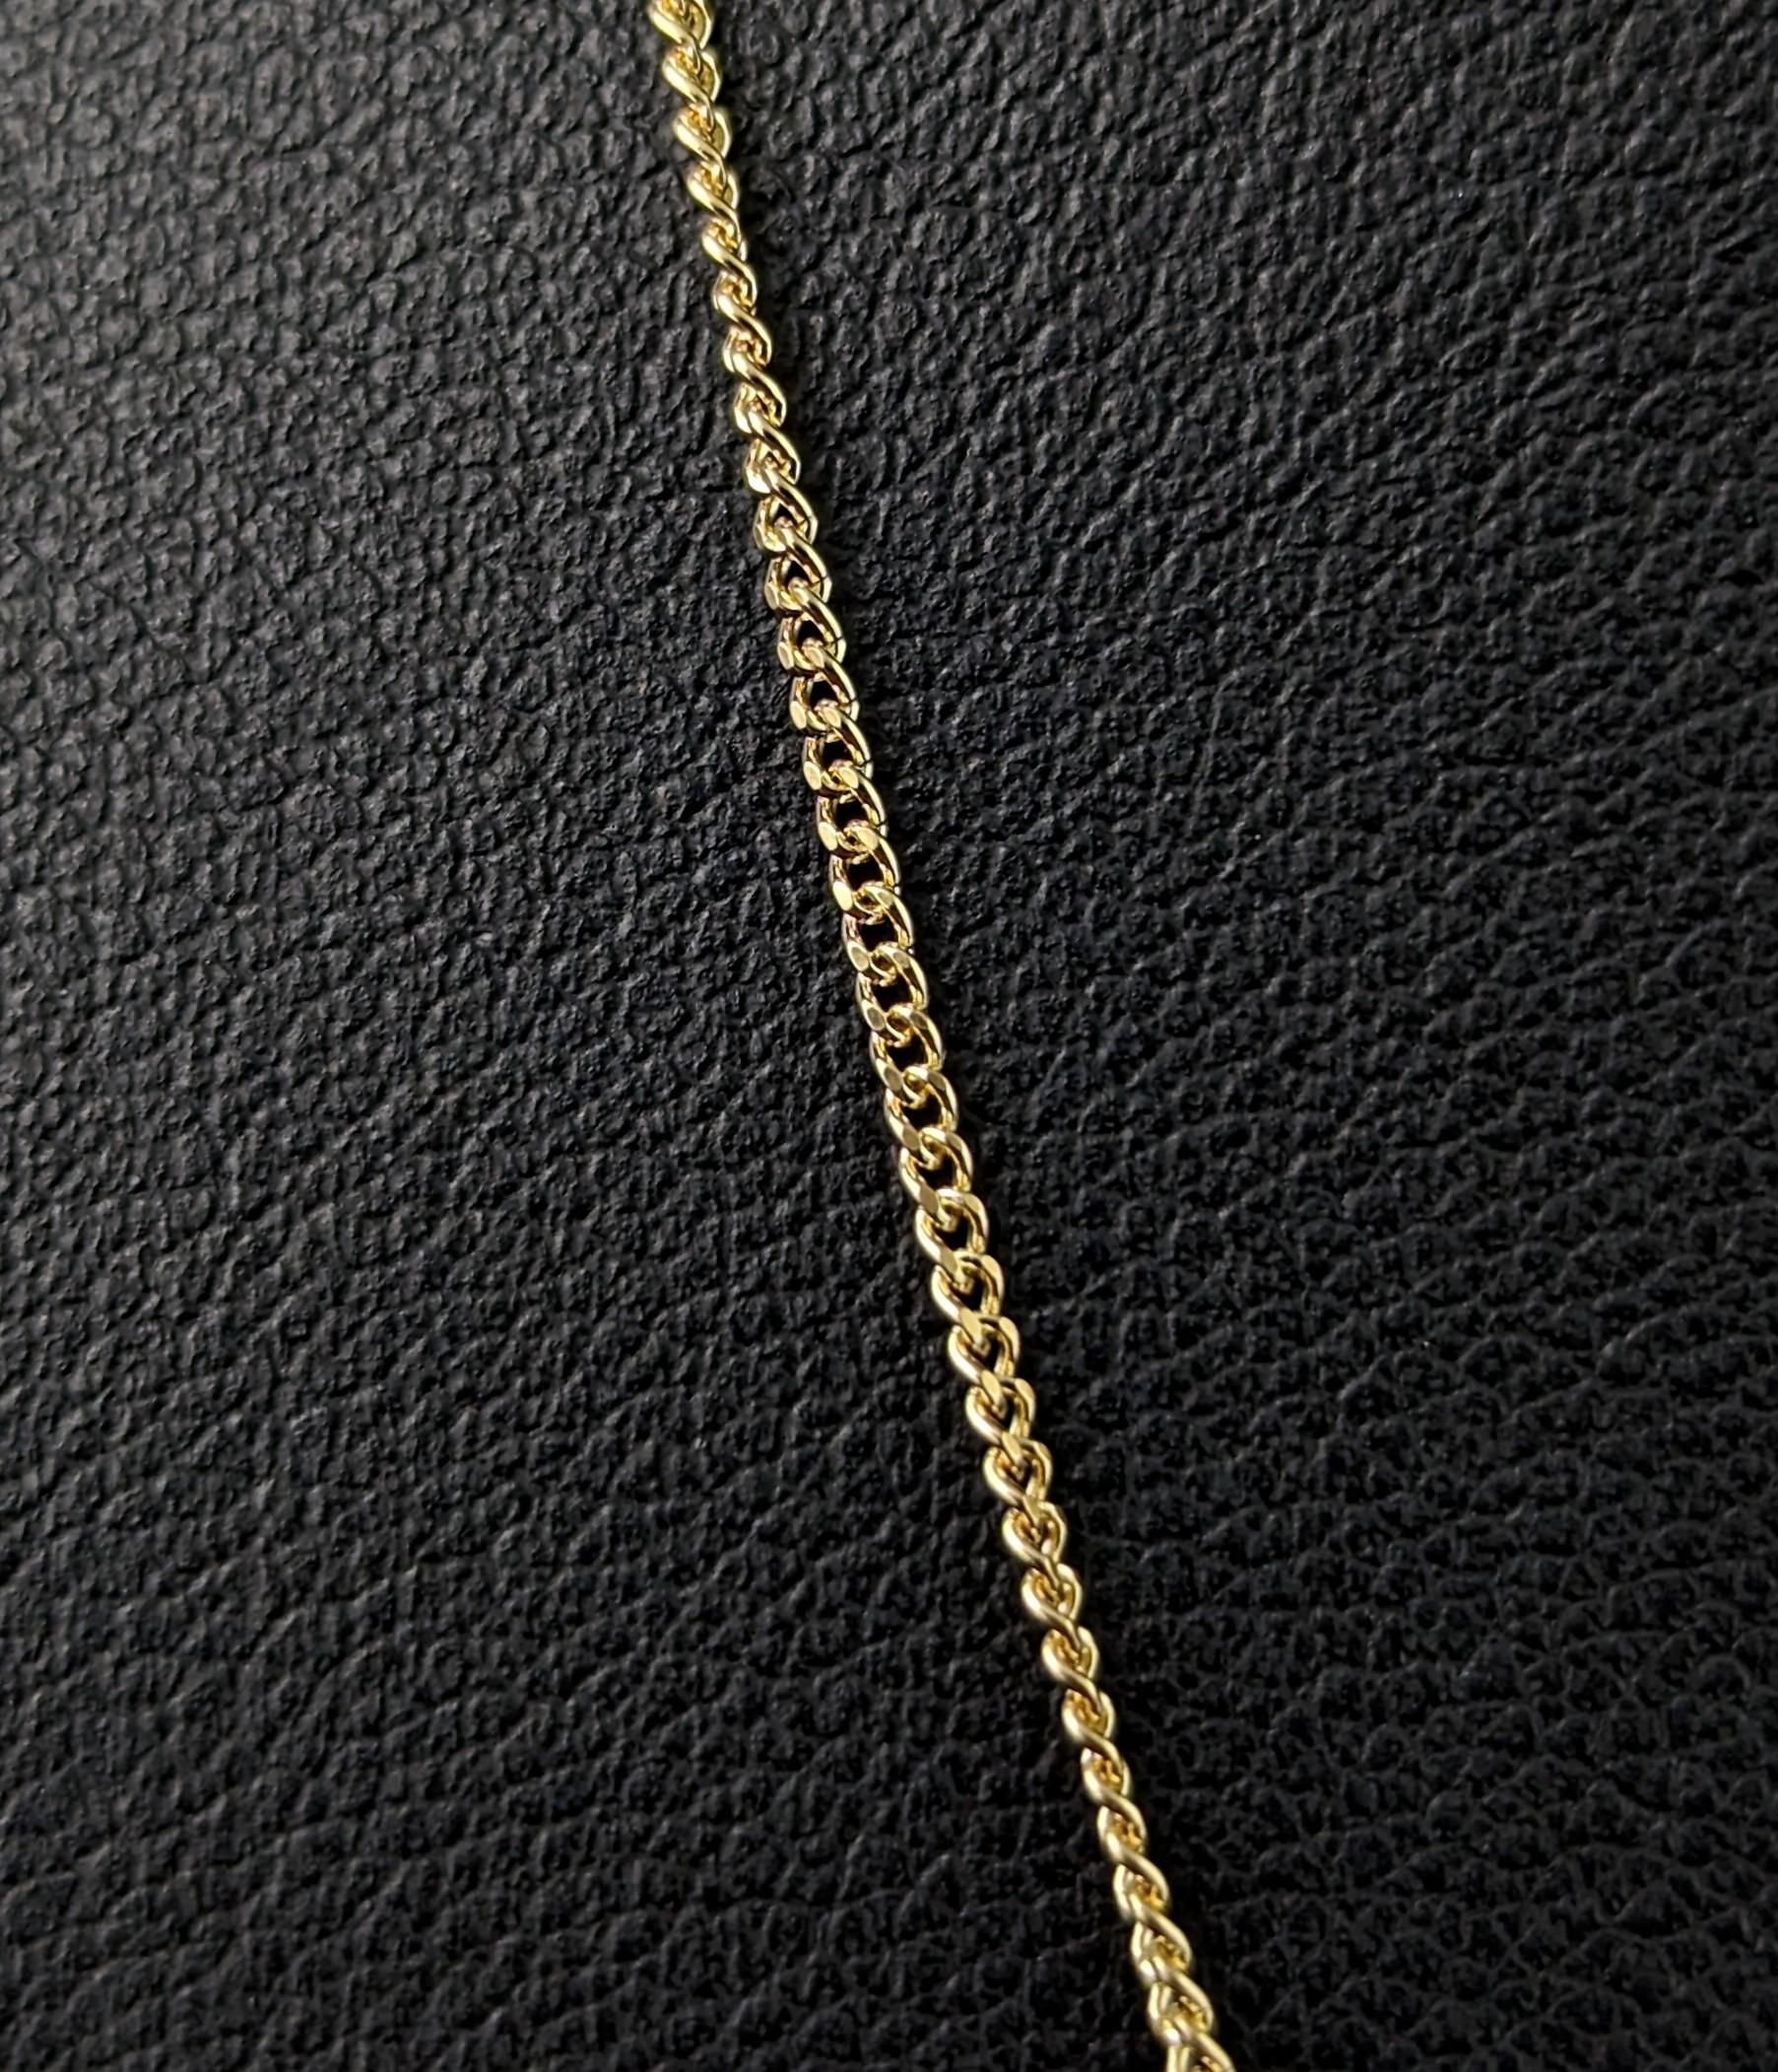 Vintage 9k yellow gold trace chain necklace, curb link  5